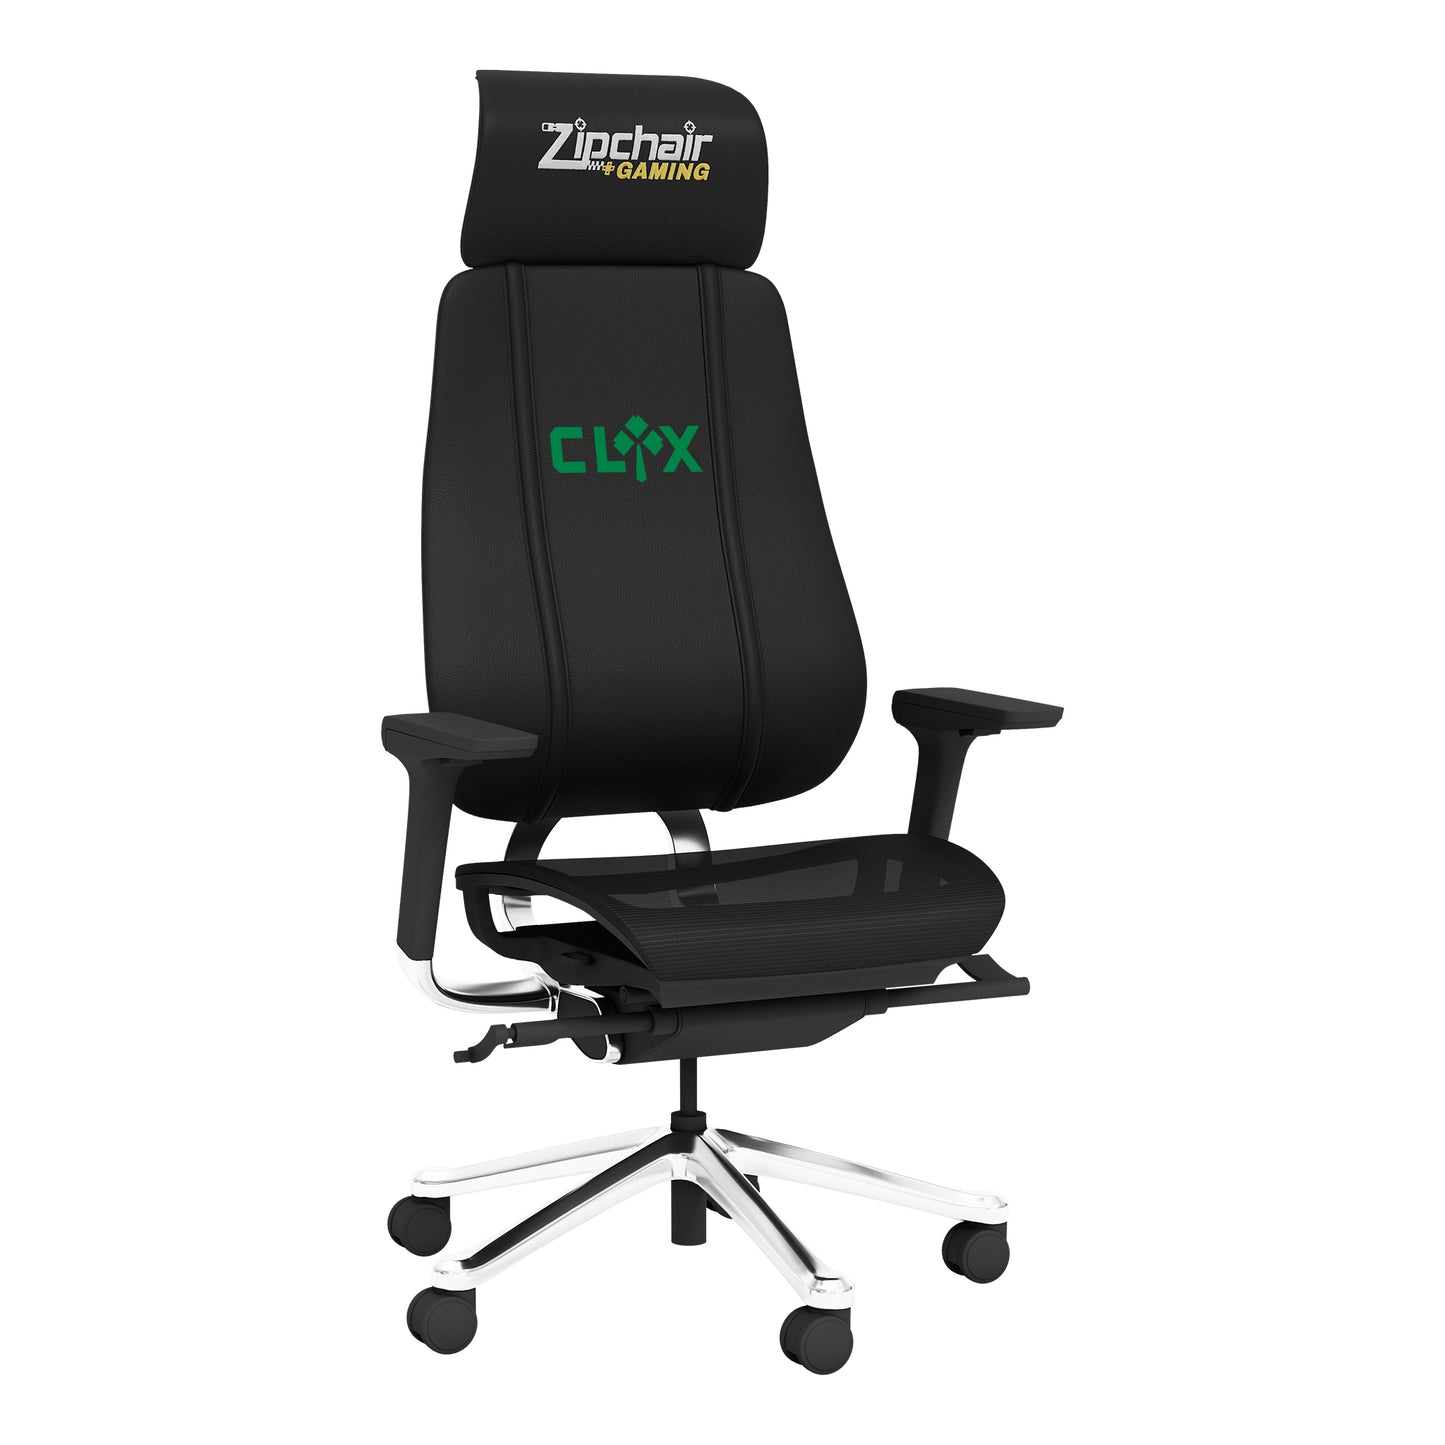 PhantomX Mesh Gaming Chair with Celtics Crossover Gaming Wordmark Green [CAN ONLY BE SHIPPED TO MASSACHUSETTS]